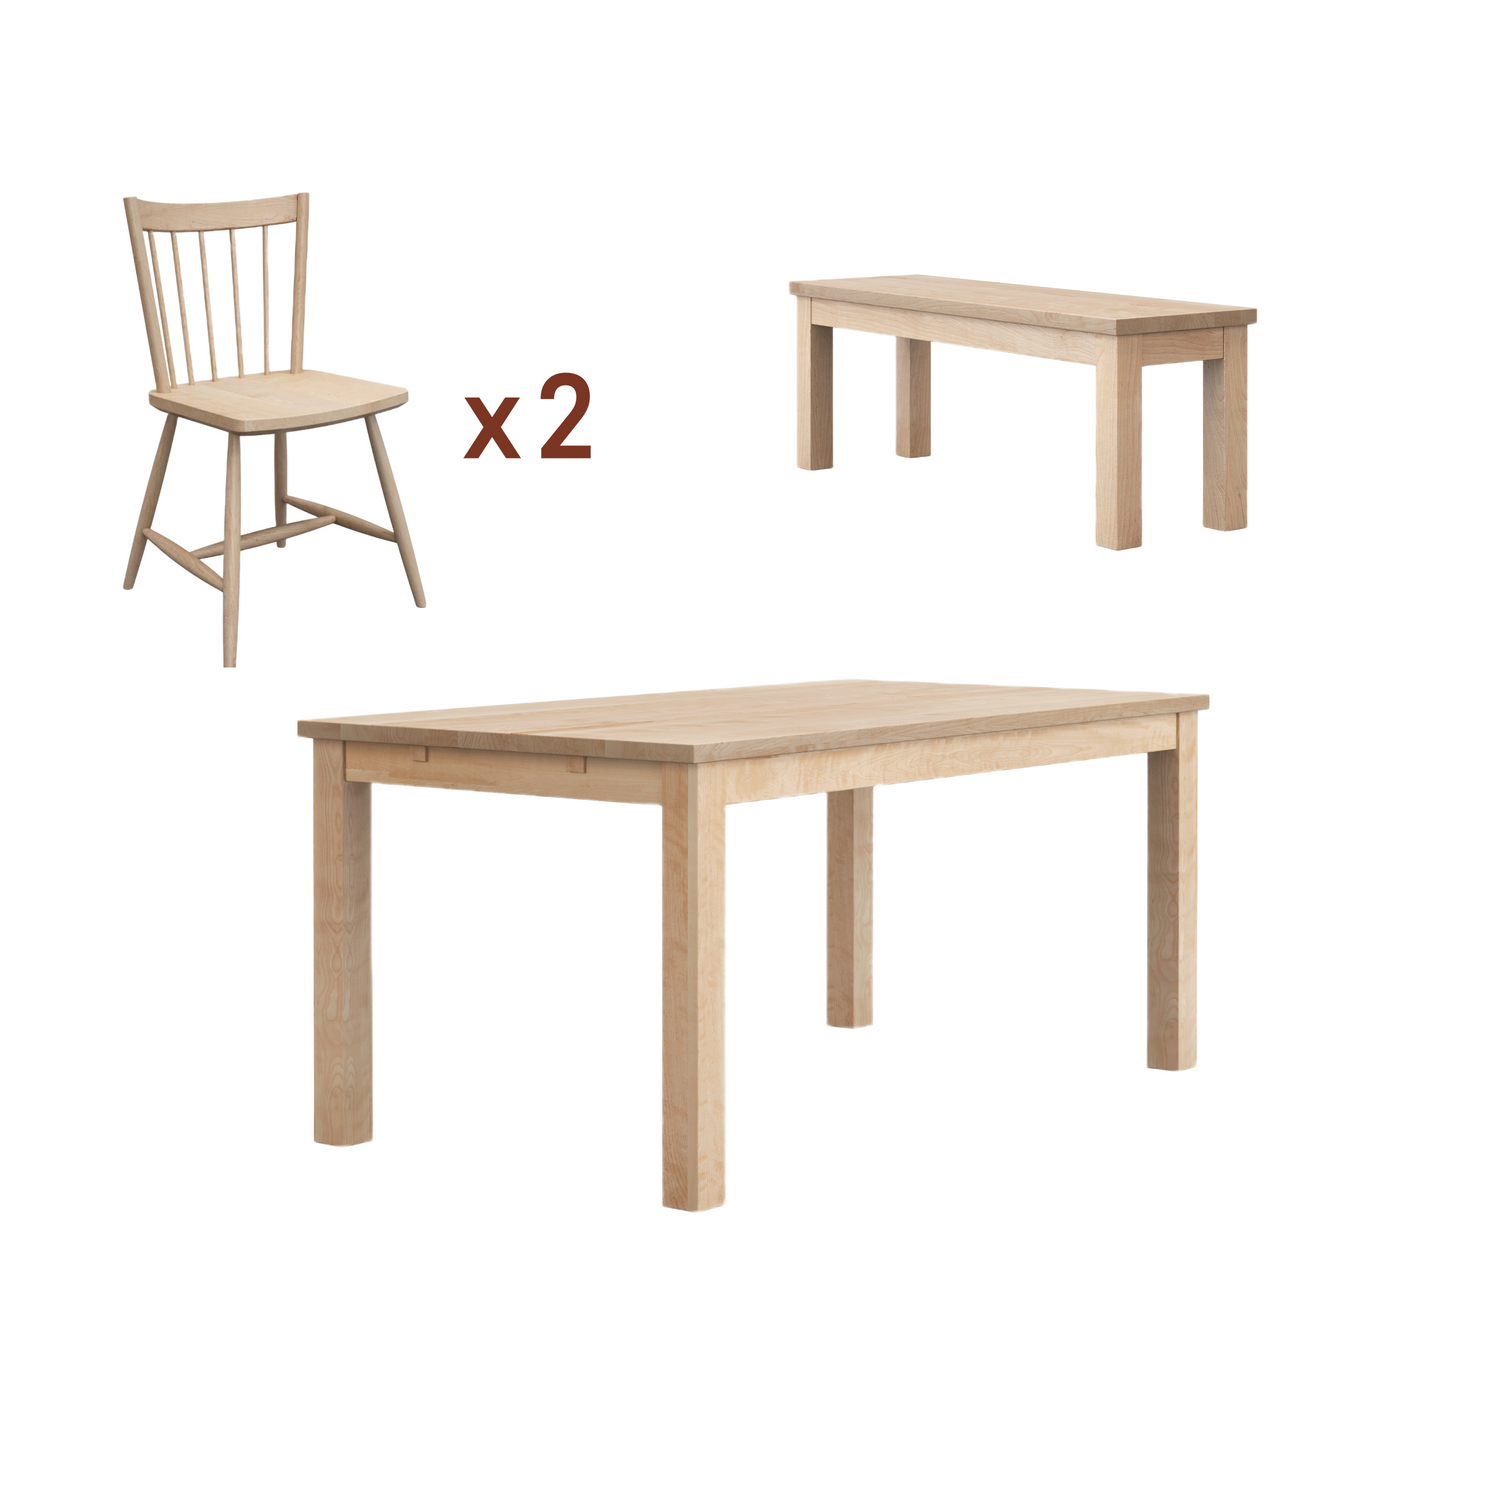 Classic table + bench and chaise Bundle